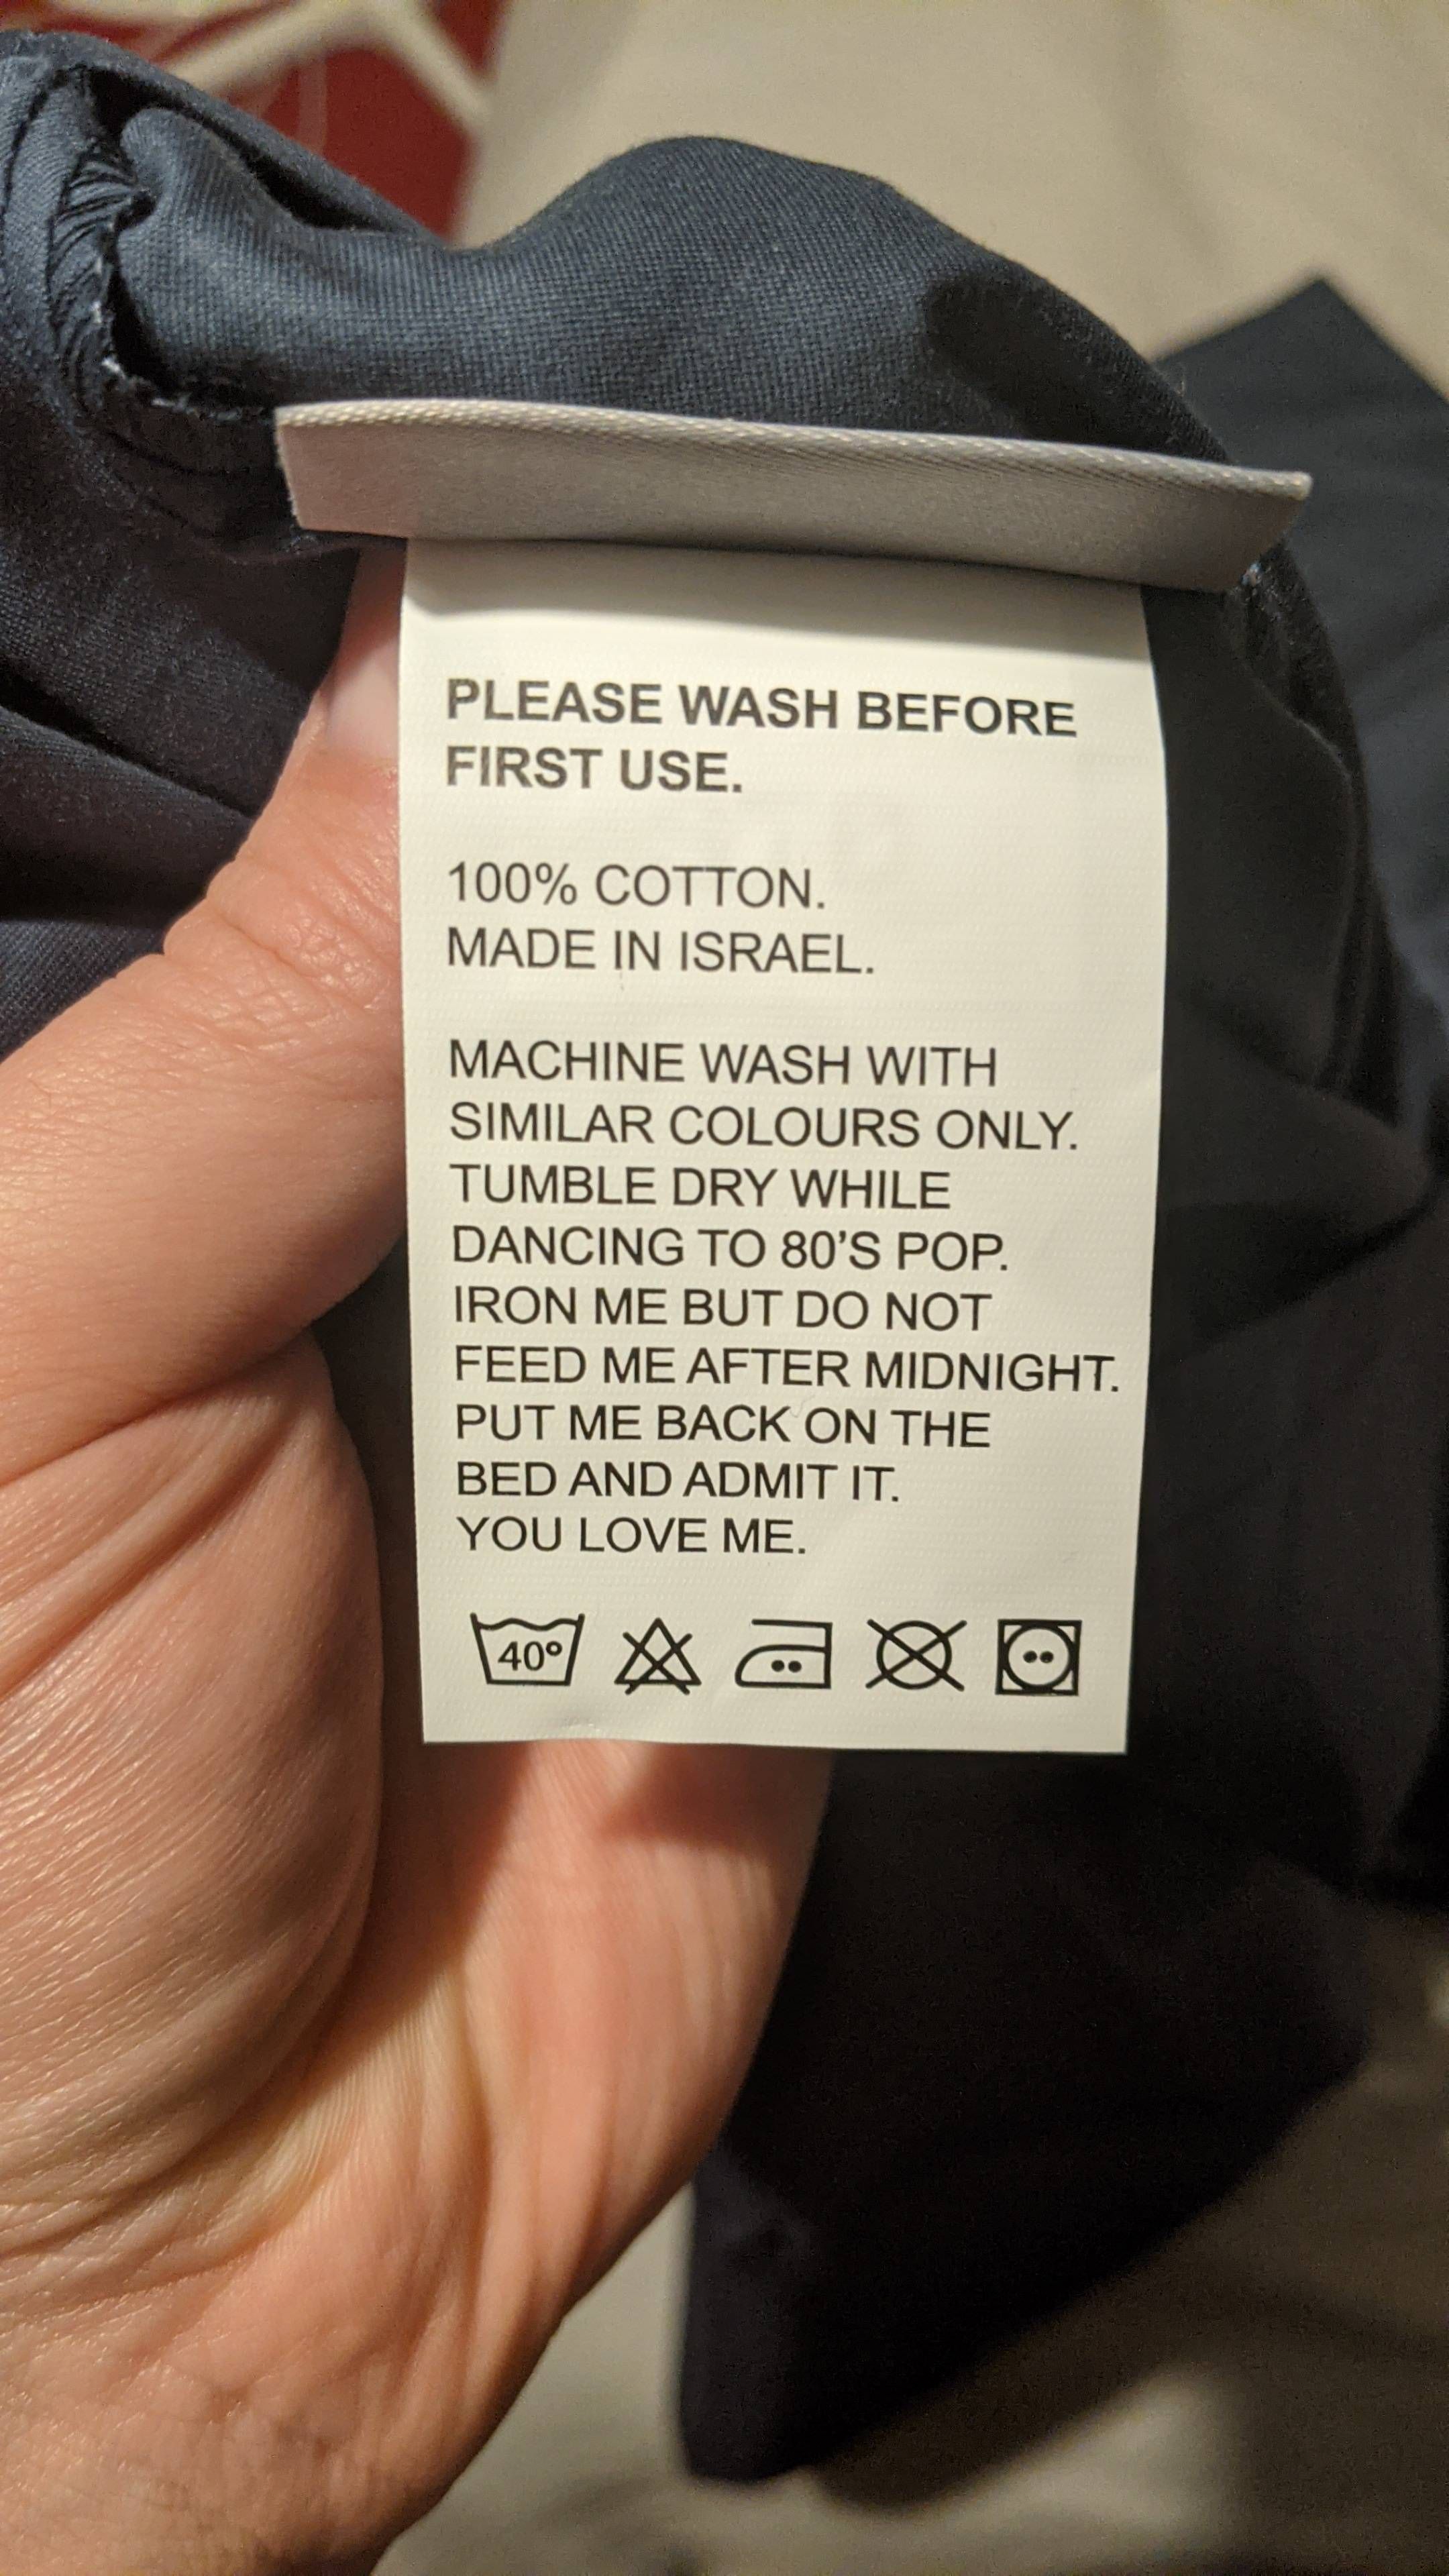 The label on my new fitted bed sheet. Slightly afraid of washing it if I shouldn't feed it after midnight.